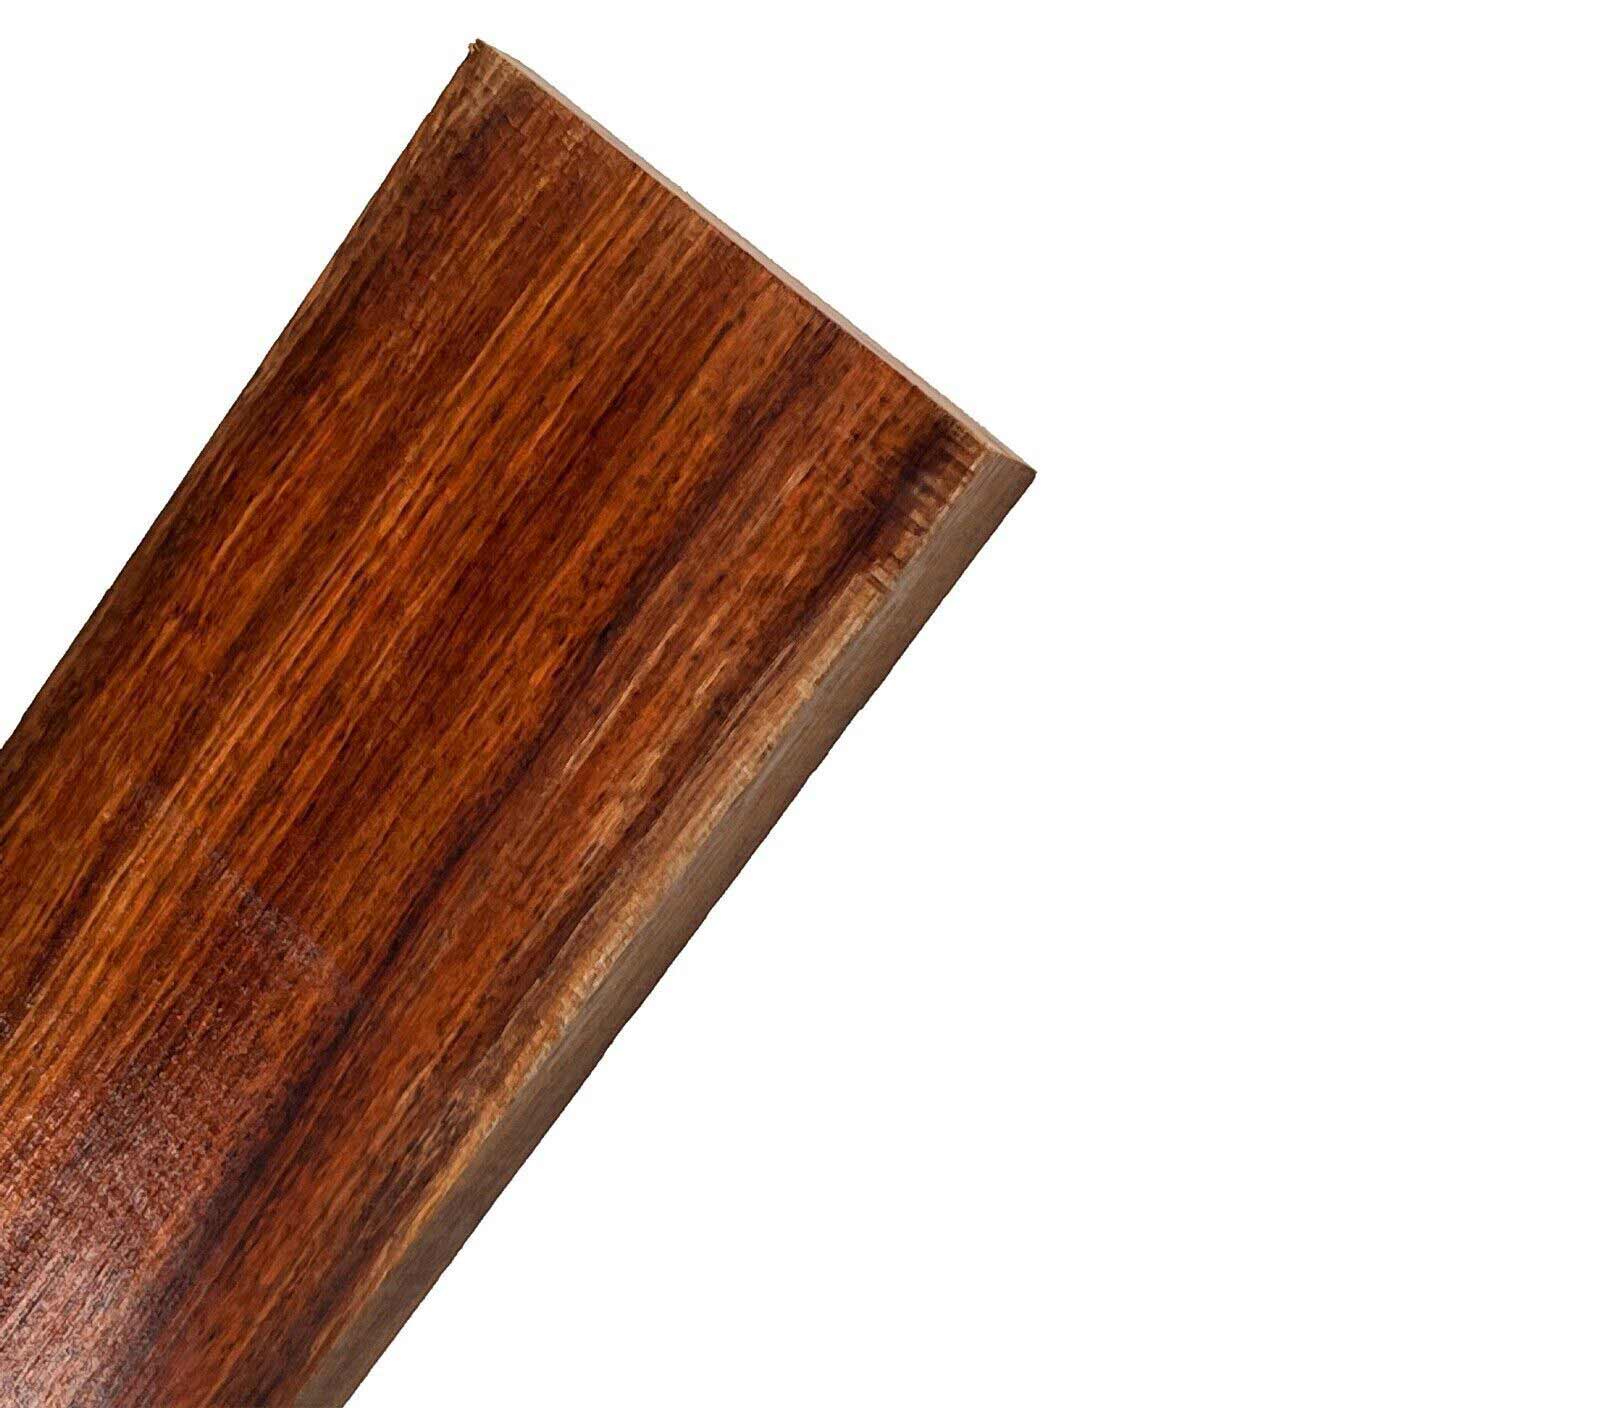 Chechen/Caribbean Rosewood Thin Stock Lumber Boards Wood Crafts - Exotic Wood Zone - Buy online Across USA 